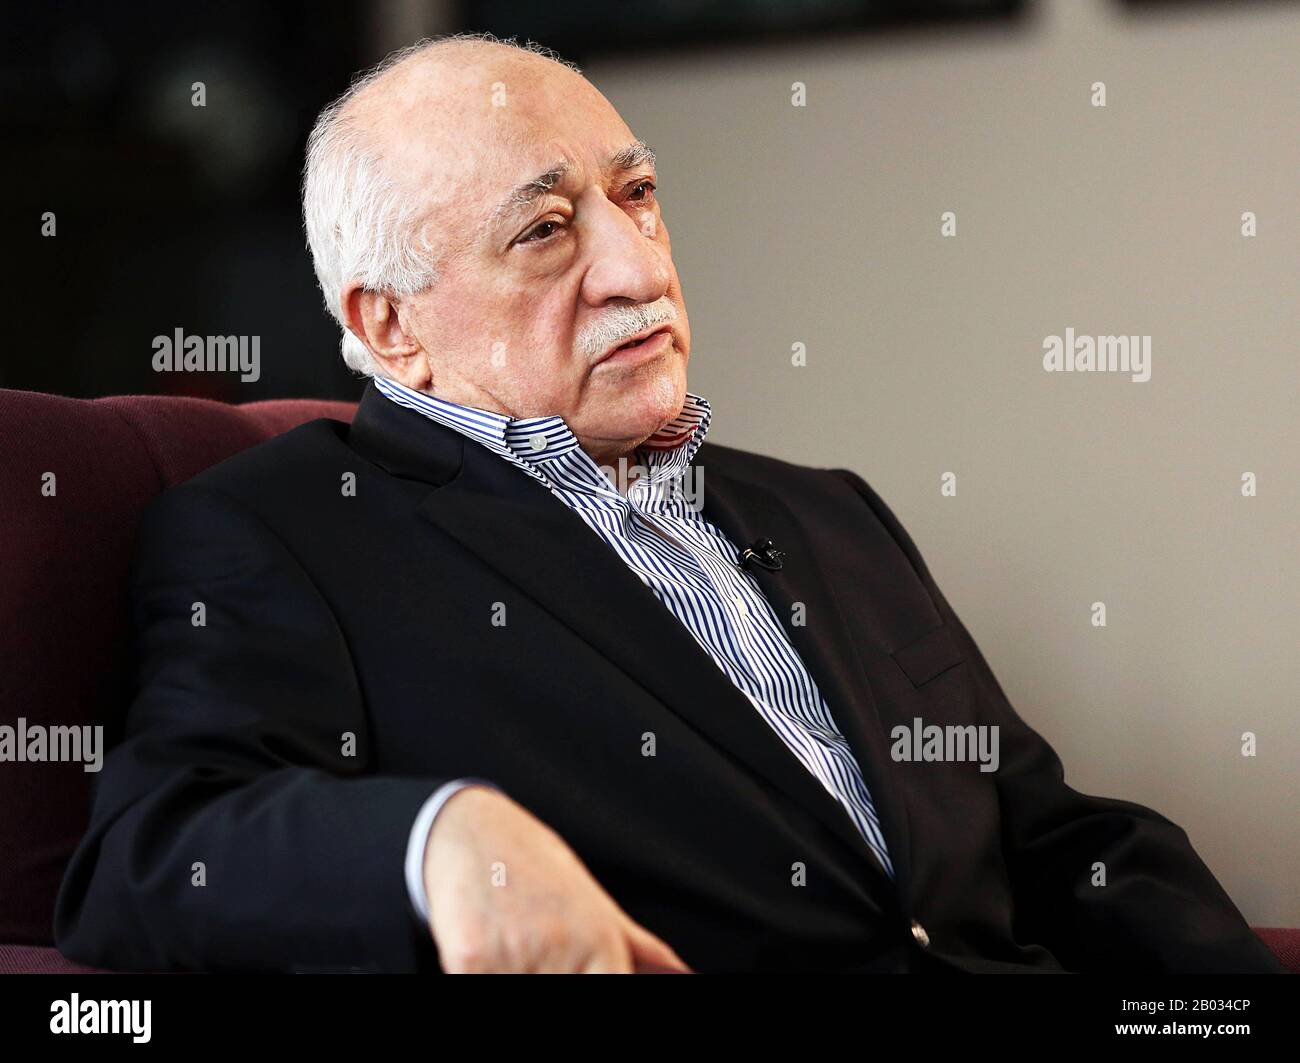 Muhammed Fethullah Gulen is the founder of the 'Gulen' movement (known as Hizmet in Turkey), and the inspiration for its largest organization, the Alliance for Shared Values.   Gulen teaches a moderate Hanafi version of Islam, deriving from the teachings of Sunni Muslim scholar Said Nursi. Gulen has stated that he believes in science, interfaith dialogue among the People of the Book, and multi-party democracy. He has initiated such dialogue with the Vatican and some Jewish organizations.   He is currently on Turkey's most-wanted-terrorist list and is accused of leading what Turkish President R Stock Photo